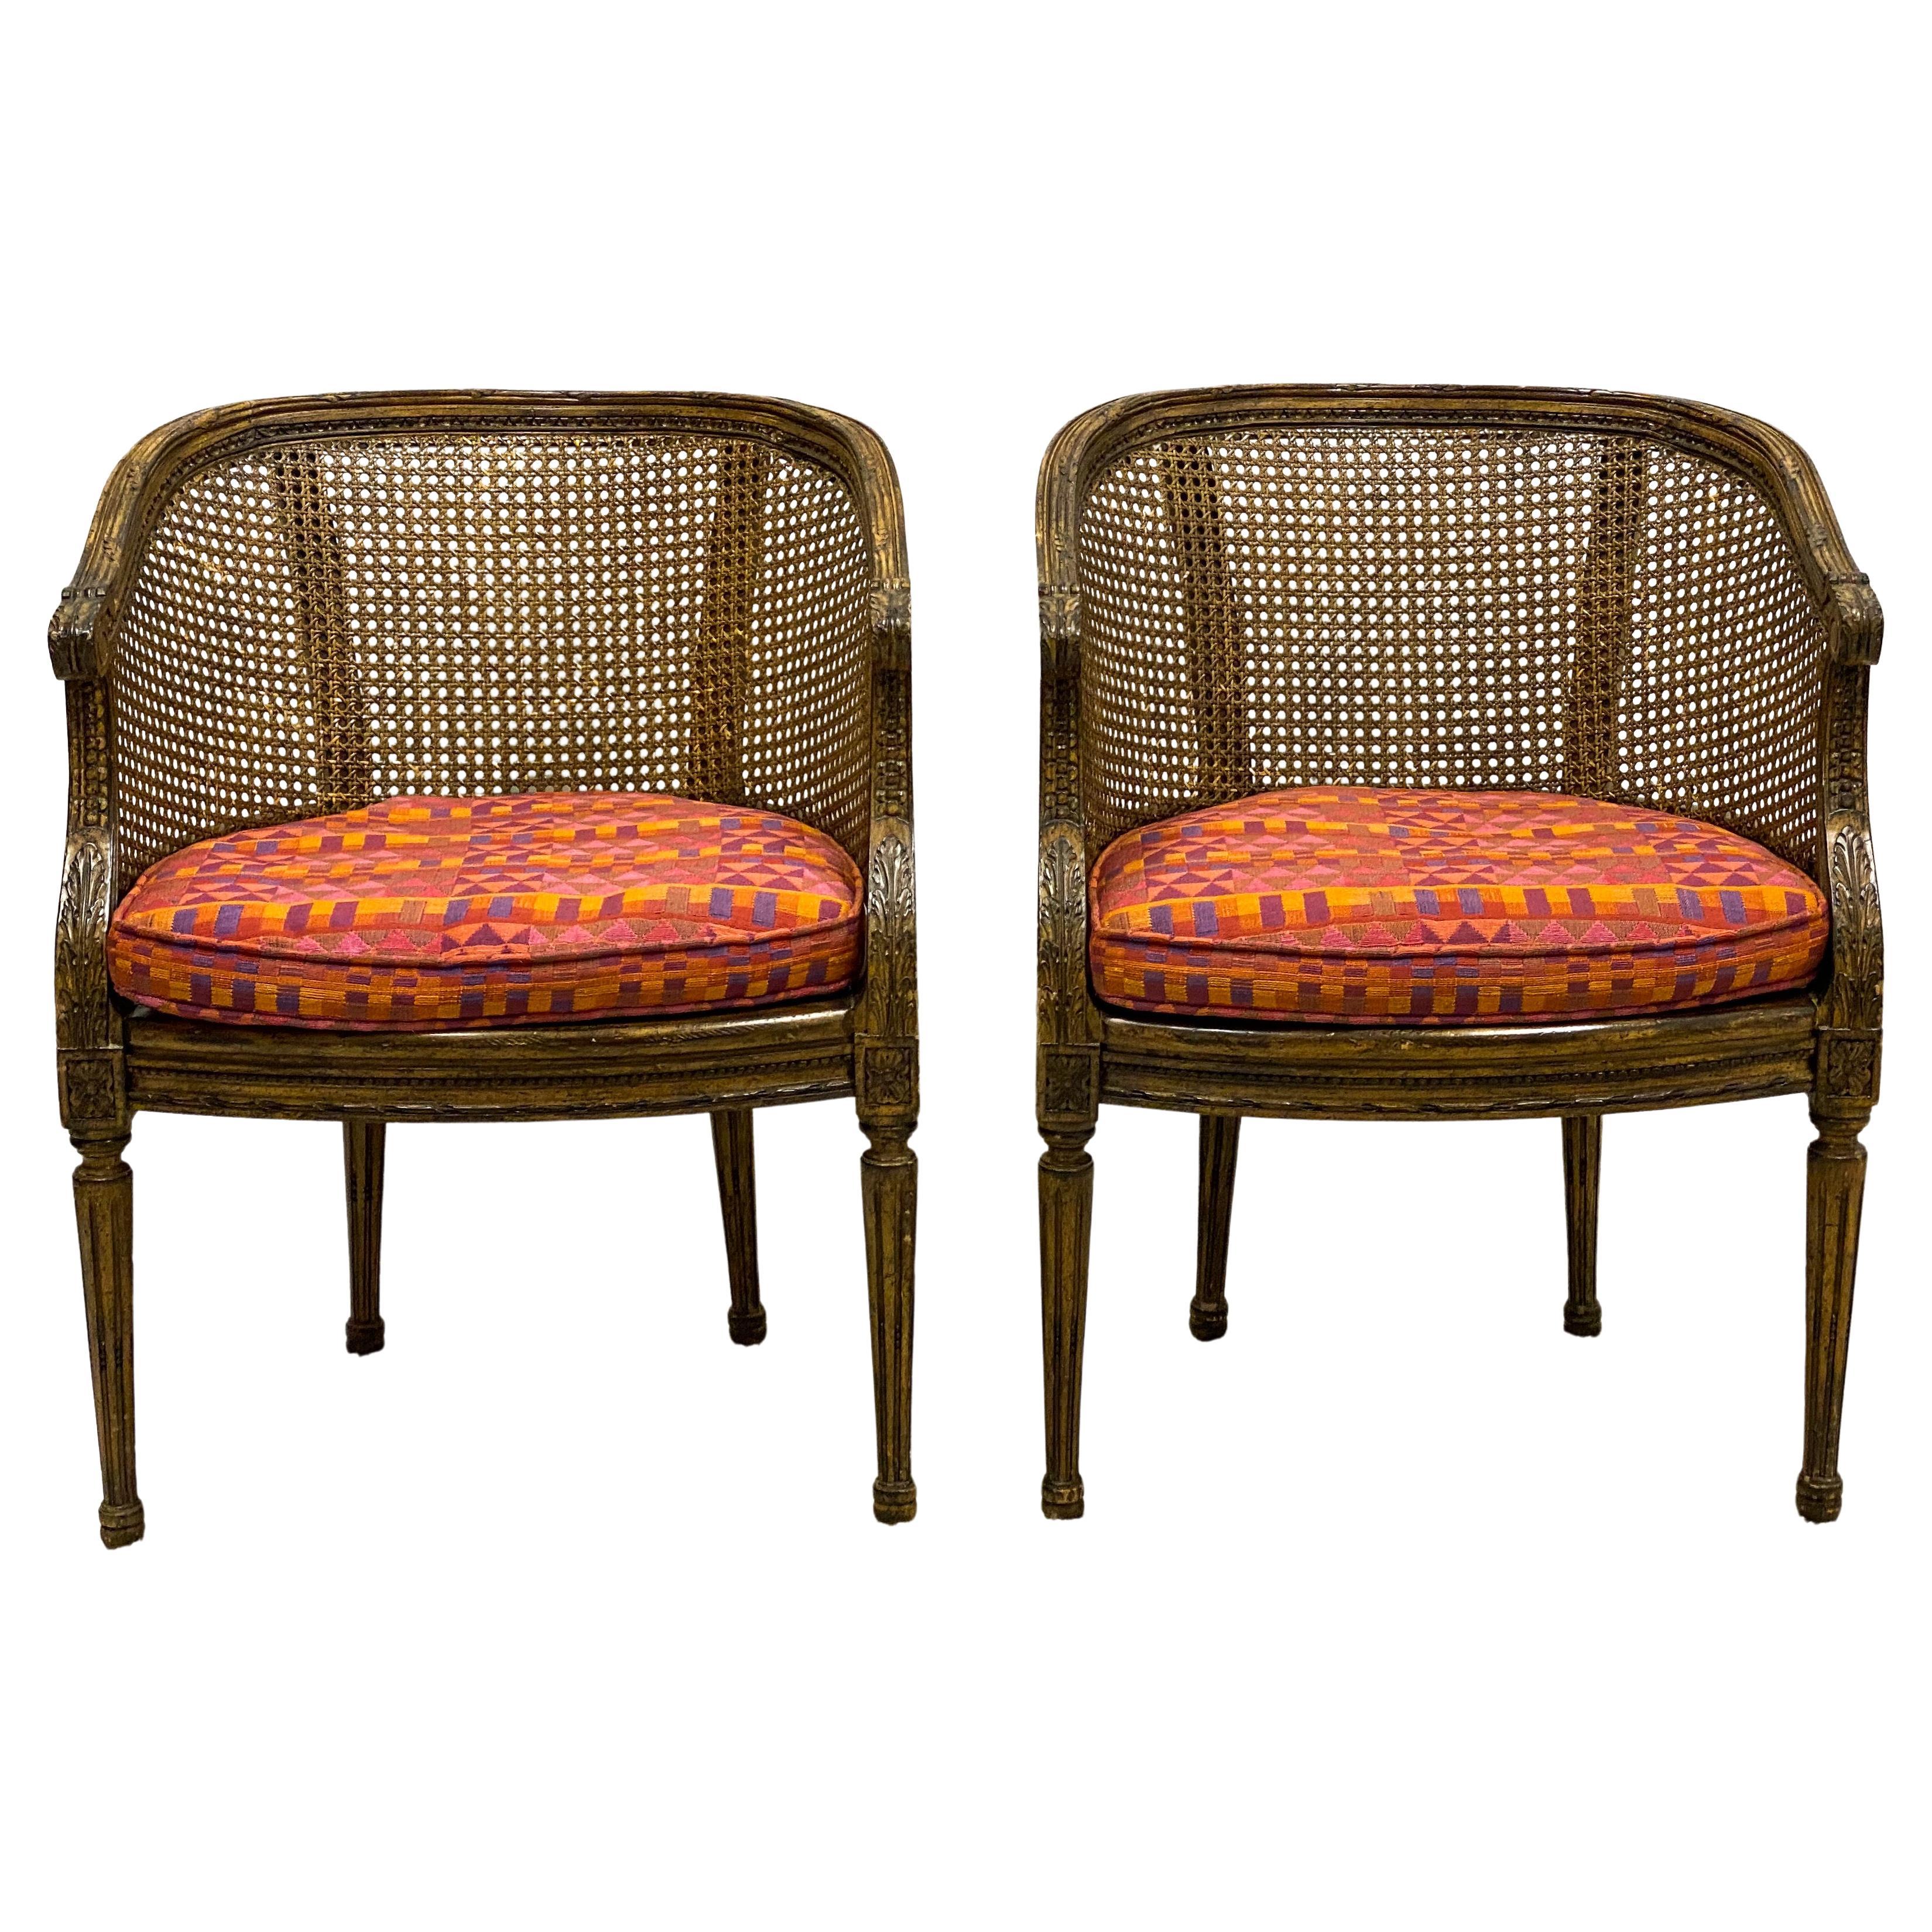 French Louis XVI Style Caned Fruitwood Chairs Att. to Lewis Mittman, Pair